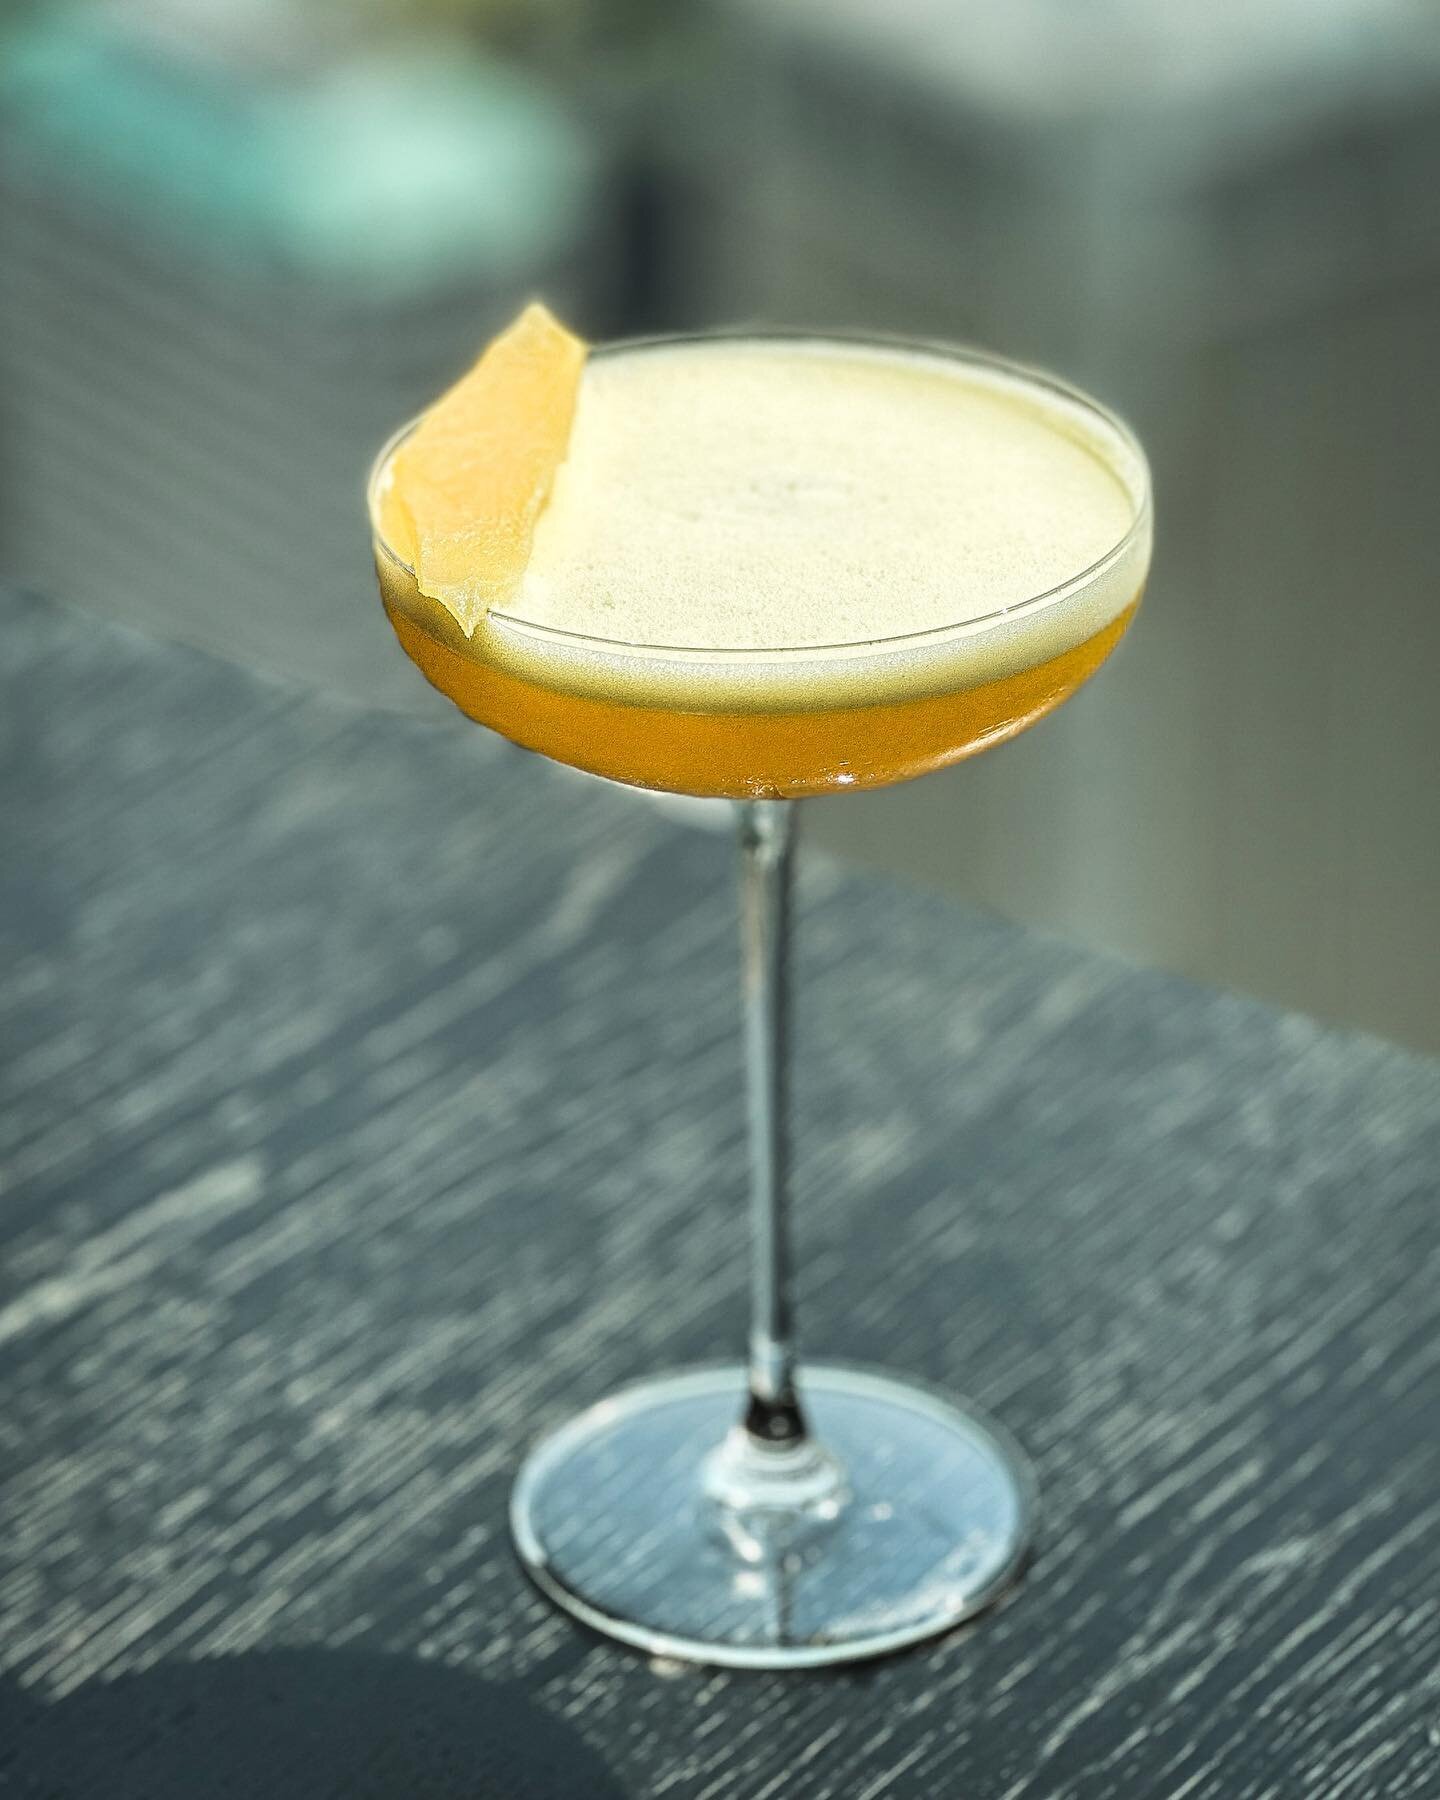 Happy World Cocktail Day! Featured here is our vitality cocktail, the Mango Martini. A refreshing concoction that consists of mango (rich in nutrients), turmeric (helps reduce inflammation) and bitters that aids in digestion.

Today is a global celeb